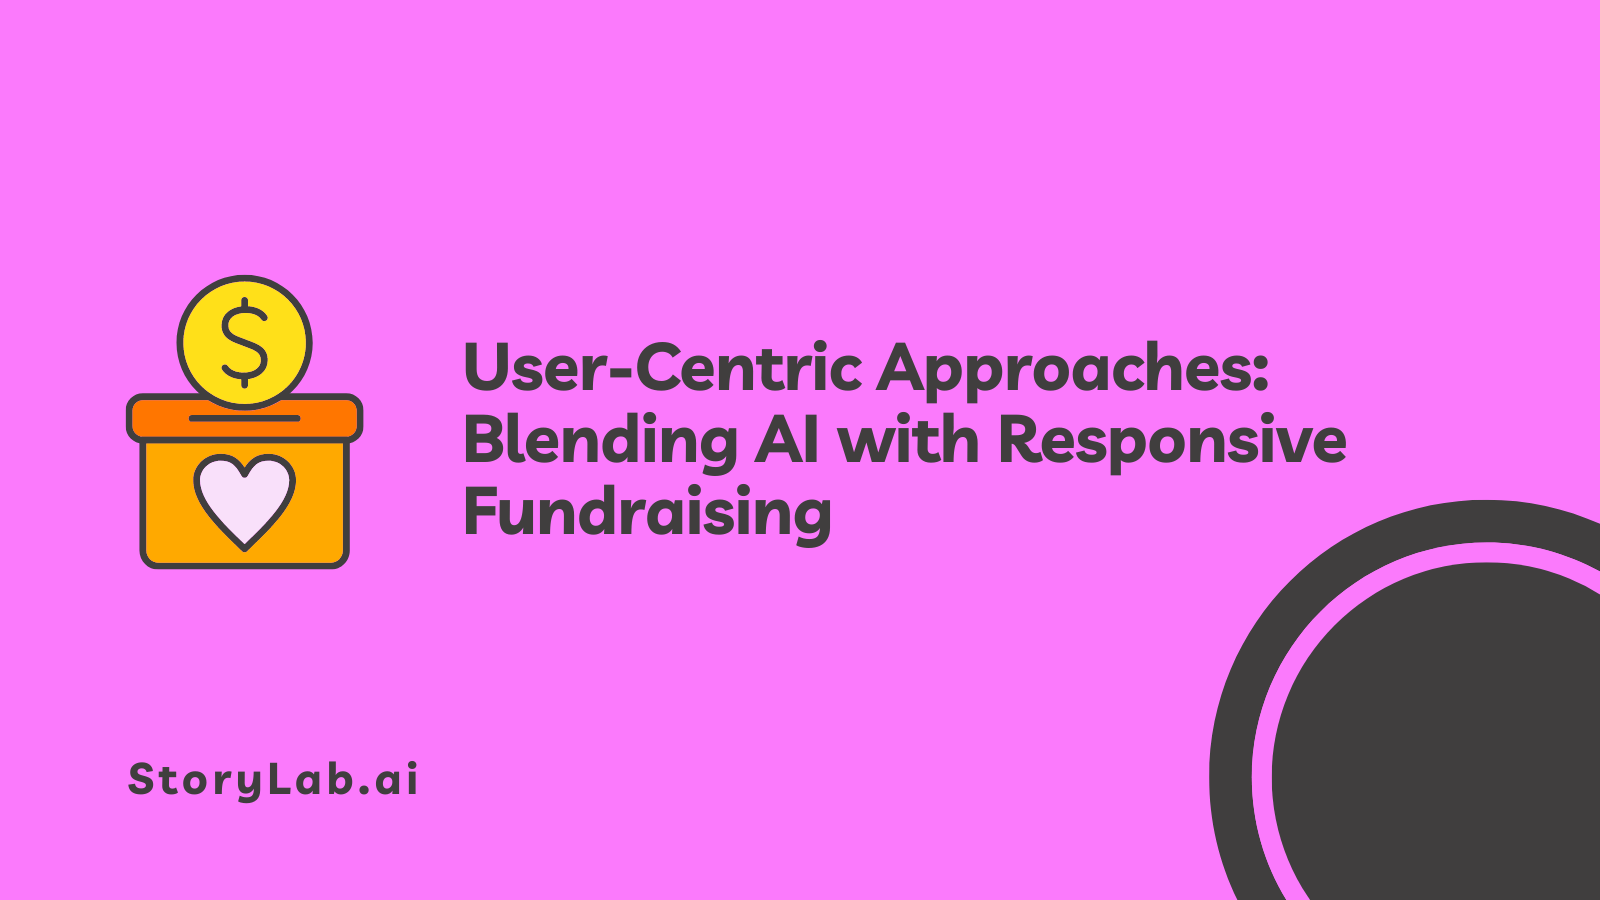 User-Centric Approaches Blending AI with Responsive Fundraising